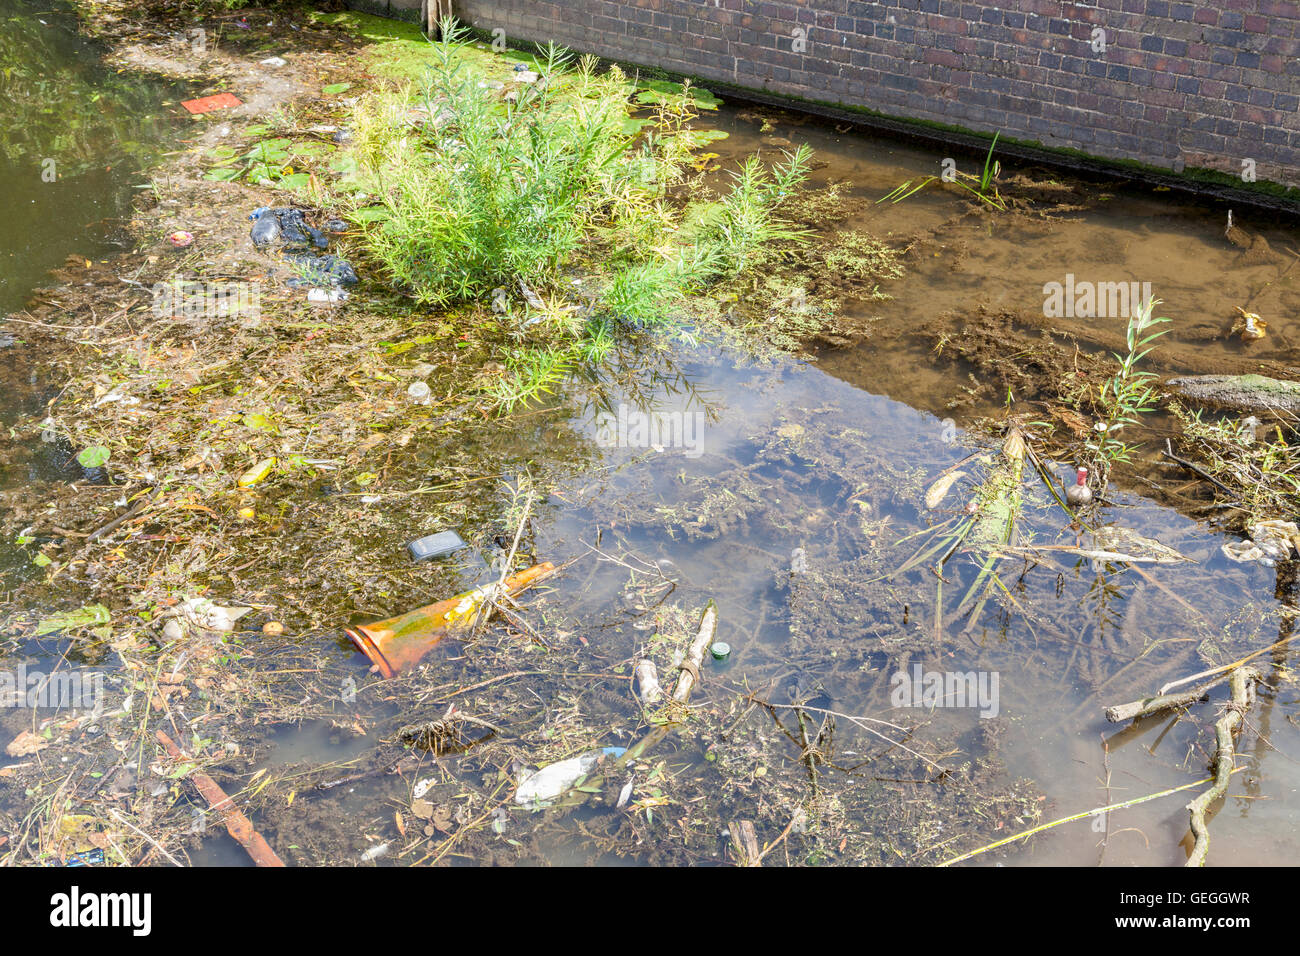 Waterways pollution. Rubbish in the disused Grantham Canal, West Bridgford, Nottinghamshire, England, UK Stock Photo